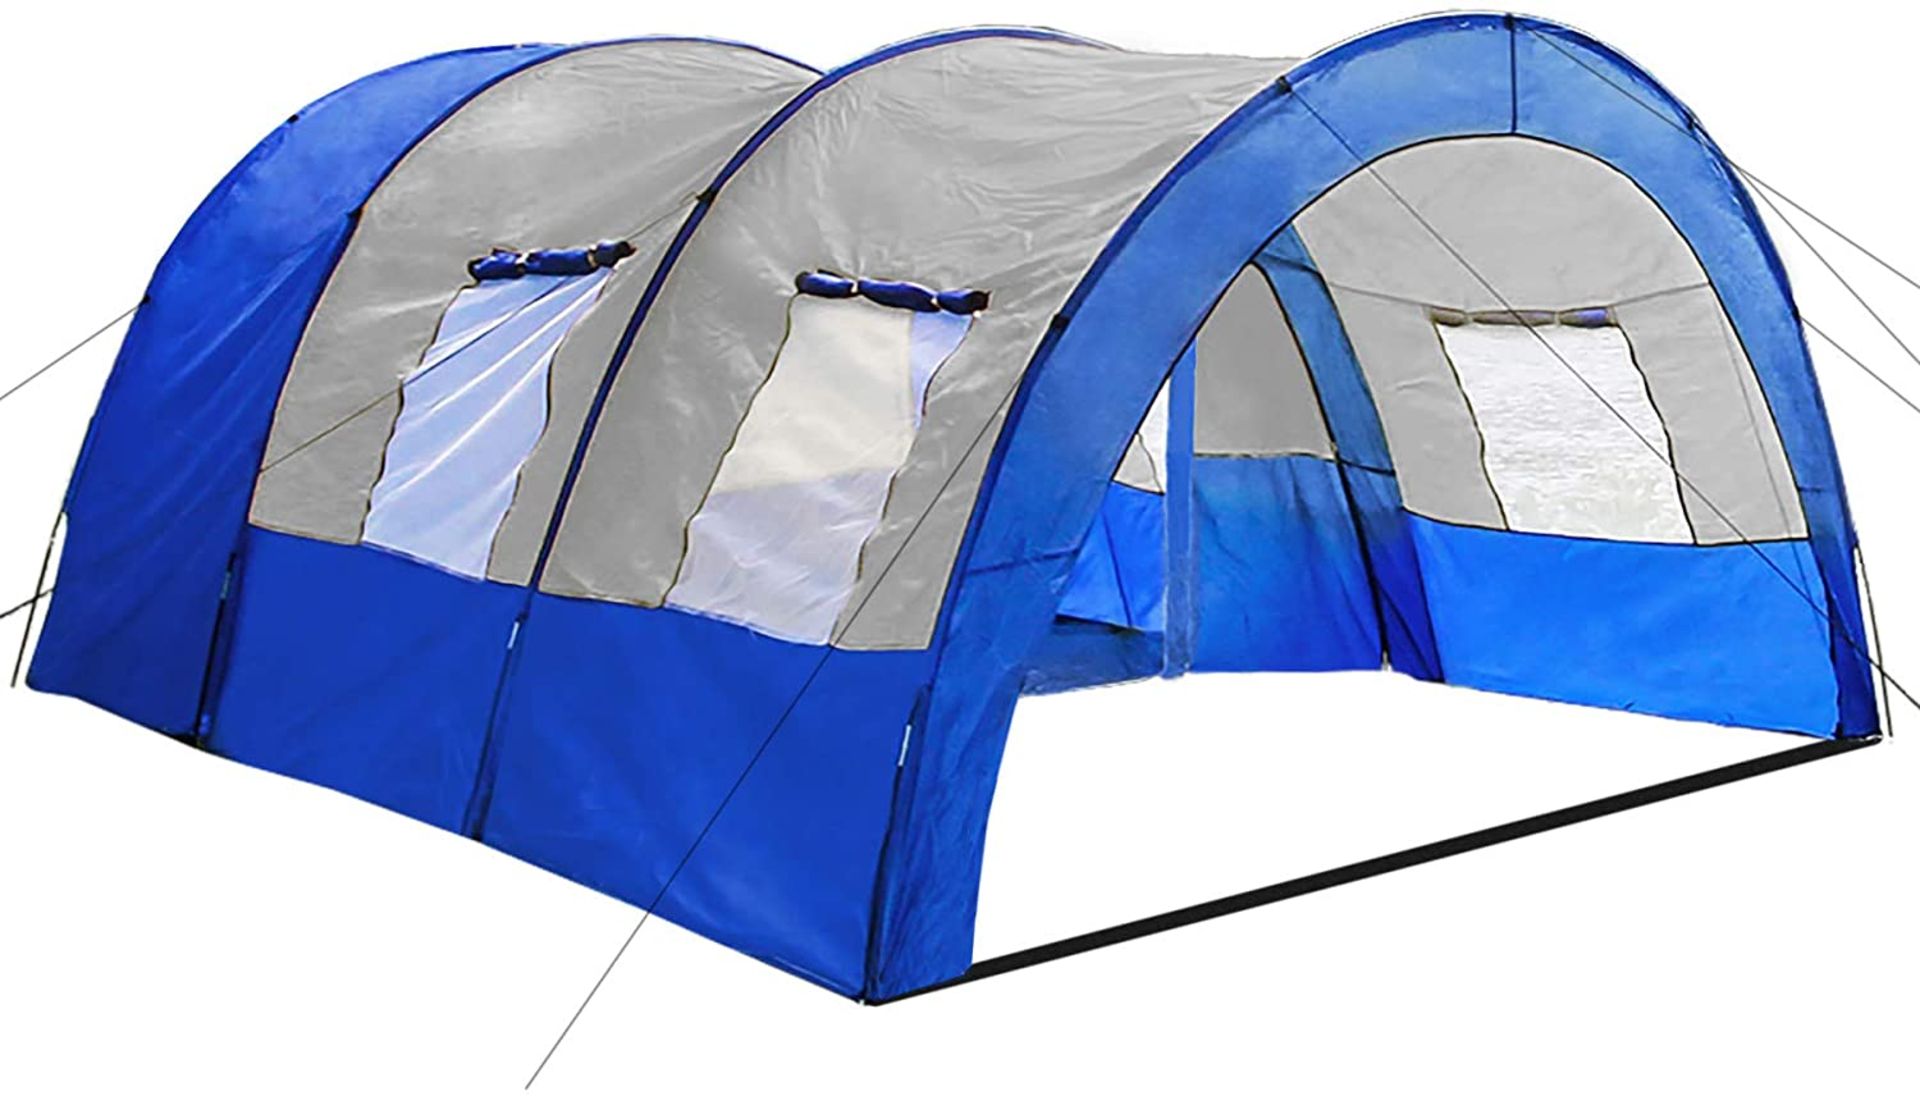 TecTake - Tunnel Tent for Max. 6 People - Boxed. RRP £149.99